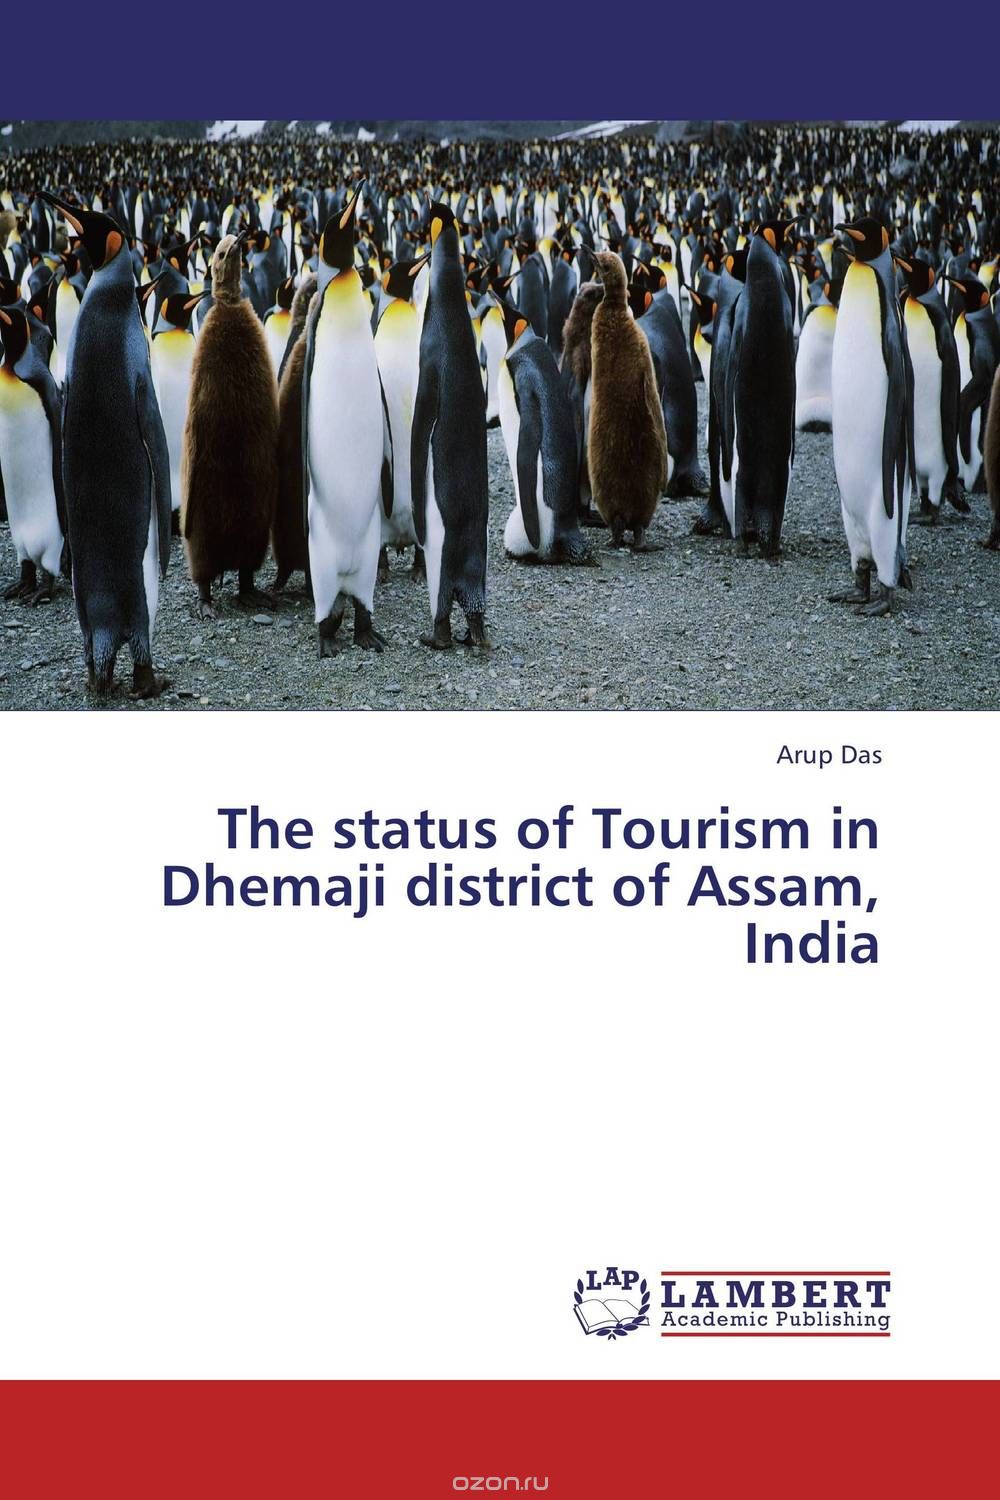 The status of Tourism in Dhemaji district of Assam, India